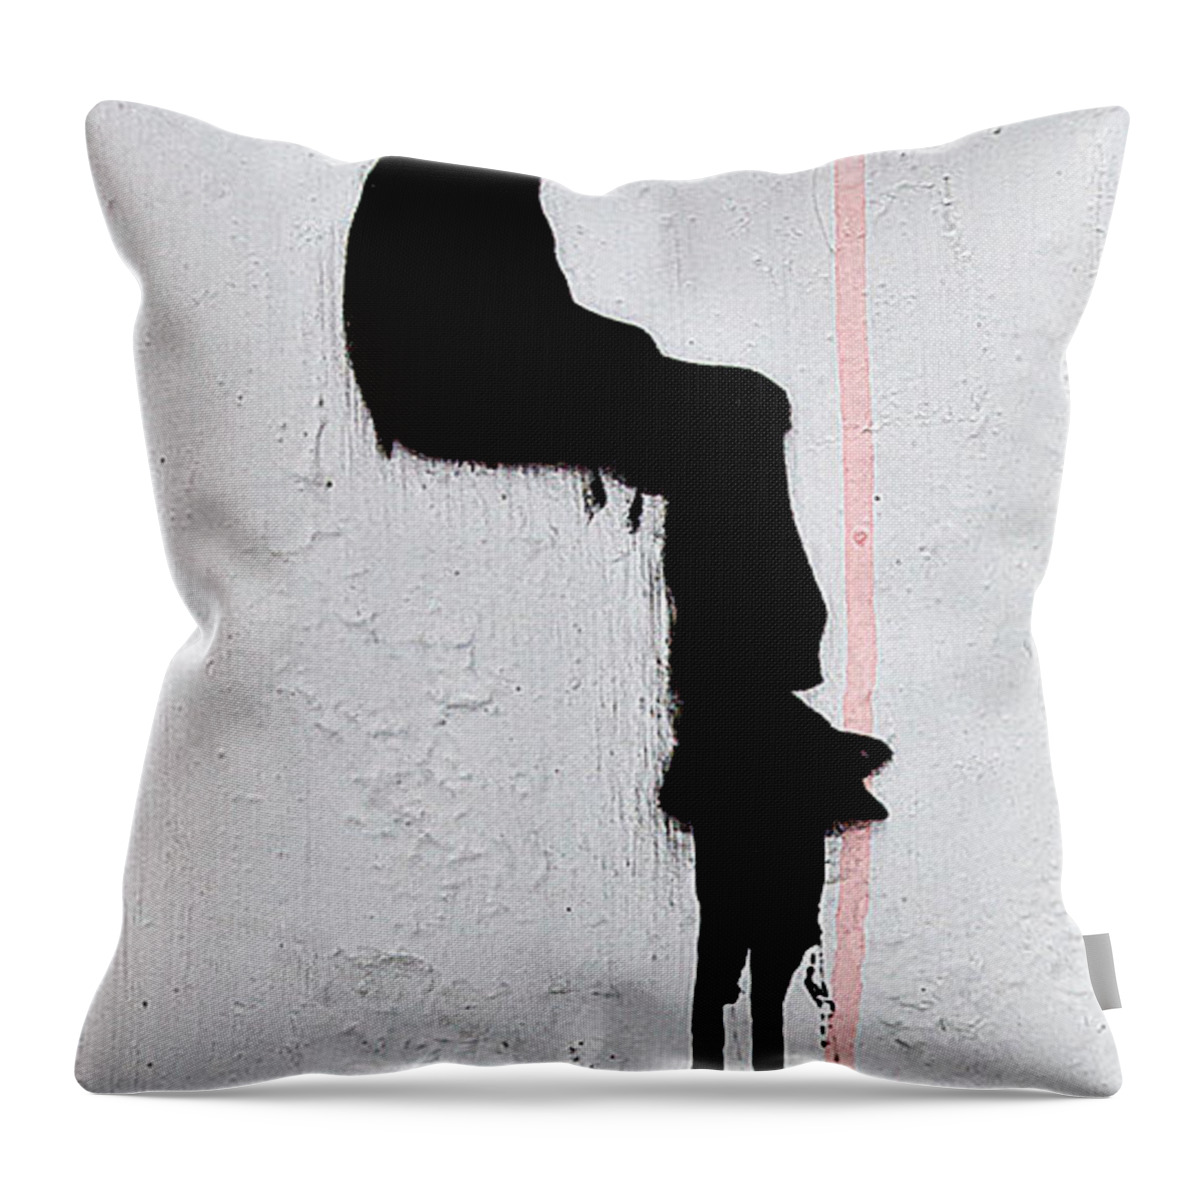 London Street Art Throw Pillow featuring the photograph Fawcett Man by Don by David Resnikoff